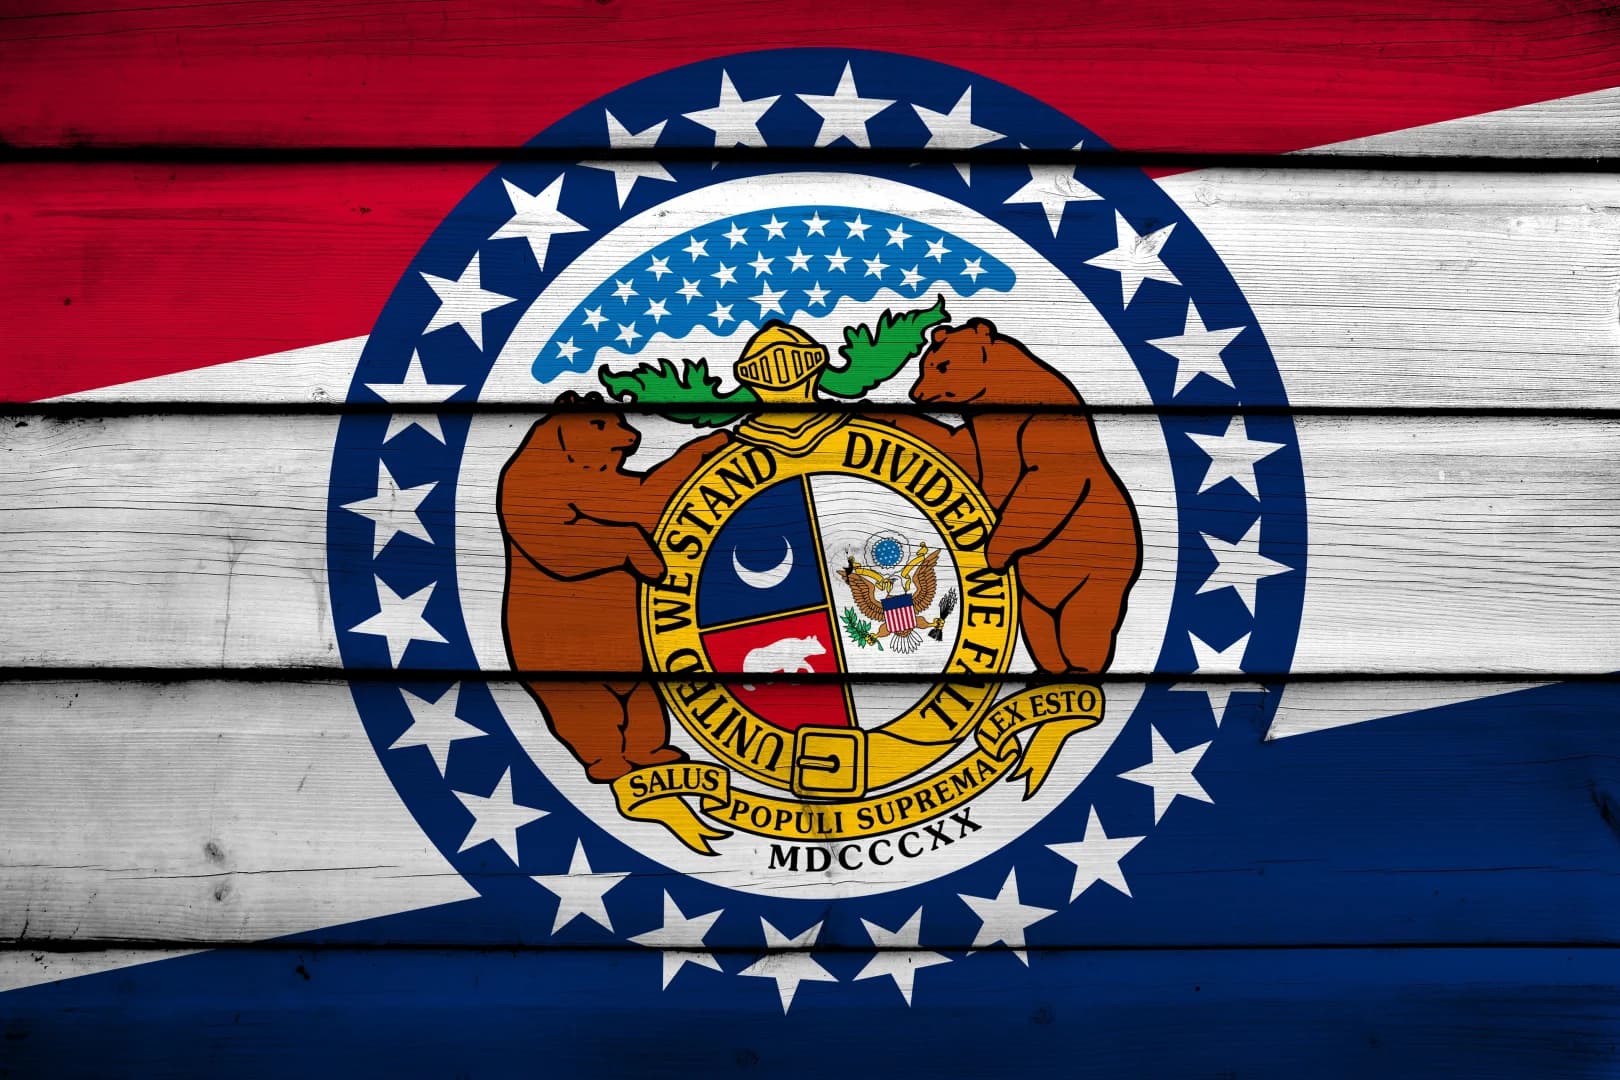 MISSOURI: Lawmakers need help passing this freedom bill